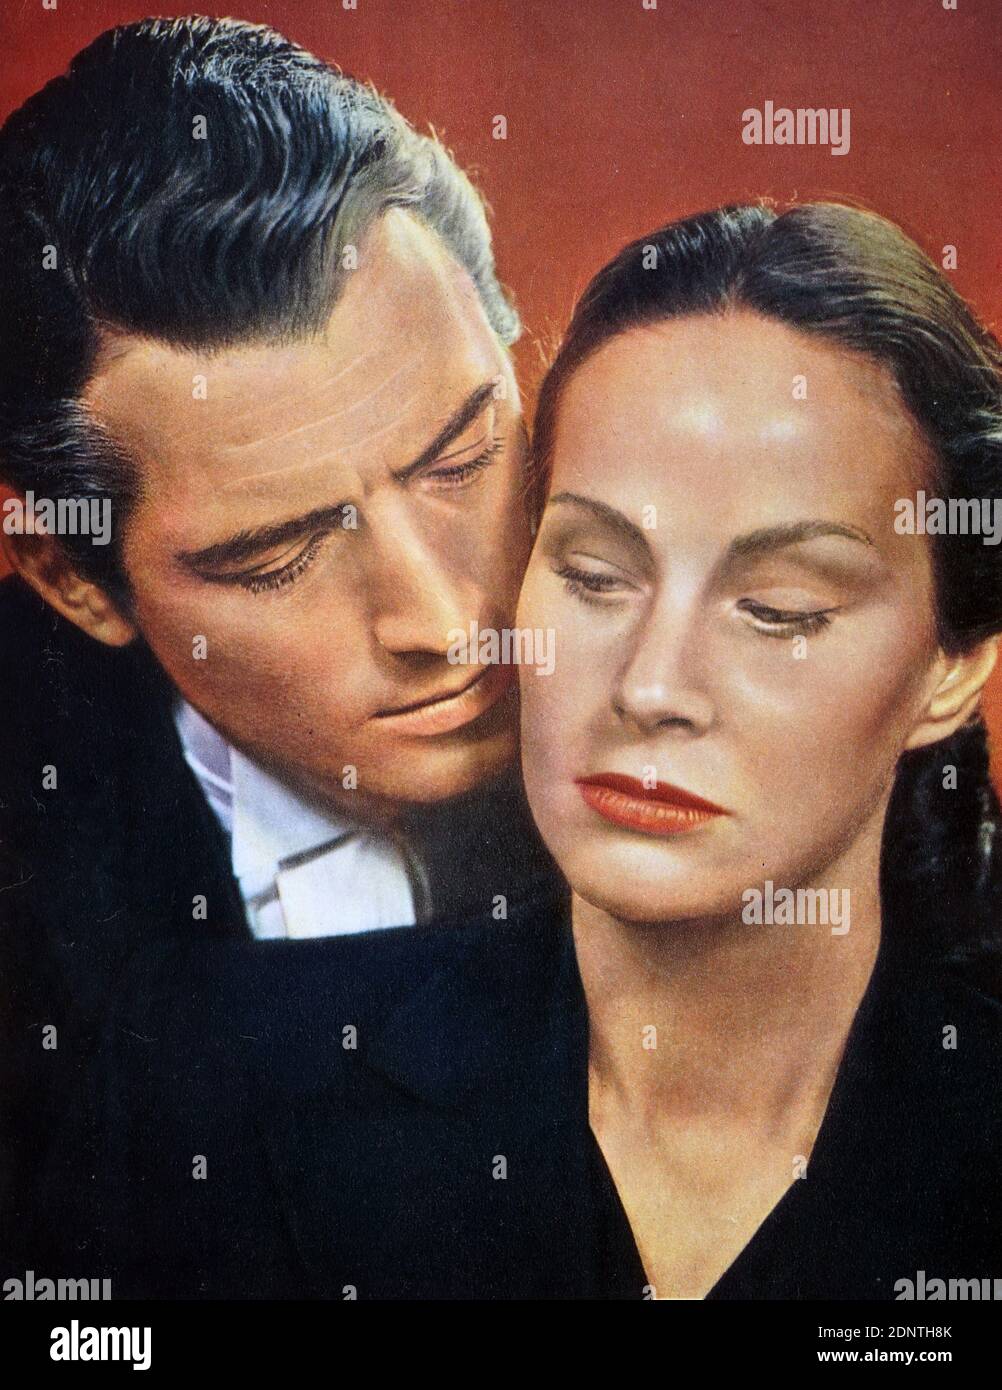 Film still of Gregory Peck (1916-2003) and Alida Valli (1921-2006) from Alfred Hitchcock 'The Paradine Case'. Stock Photo